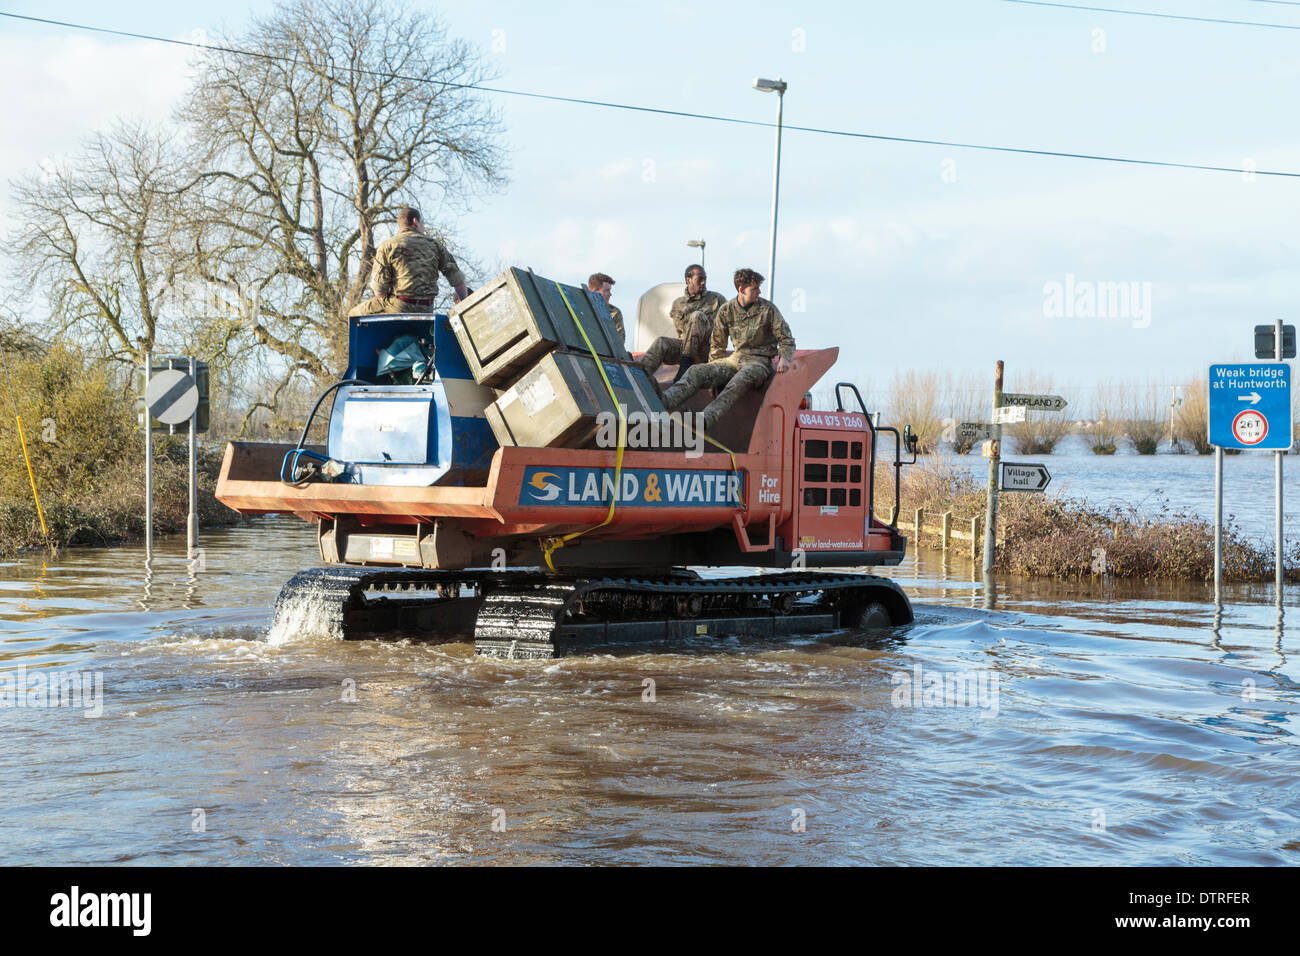 Burrowbridge, UK. 22nd Feb, 2014. Commandos helping at Burrowbridge on the flooded Somerset Levels on February 22, 2014. A group of soldiers are transported through the floodwater by workers of the Environment Agency in a Trac-dumper, a specialised vehicle capable of going through deep water. Supplies of oil and mechanical parts are sent to Saltmoor Pumping Station where water from Northmoor is being pumped into the tidal River Parrett to provide relief to the flooded area. These are the worst floods on the Somerset Levels in living history. Stock Photo